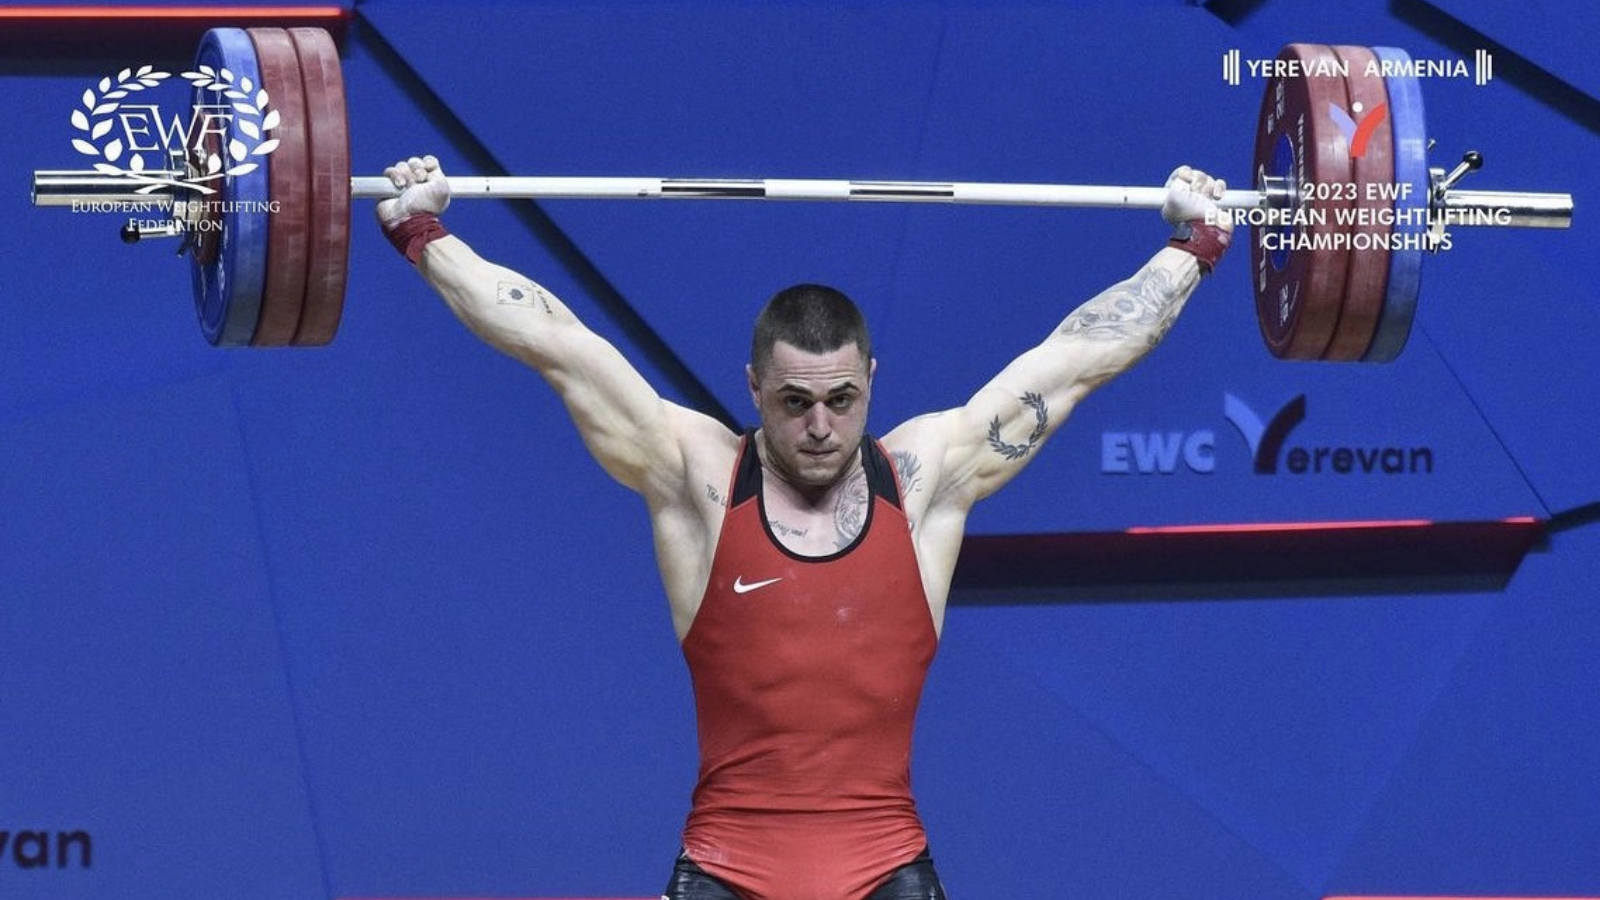 European Weightlifting Championships 2023 Results